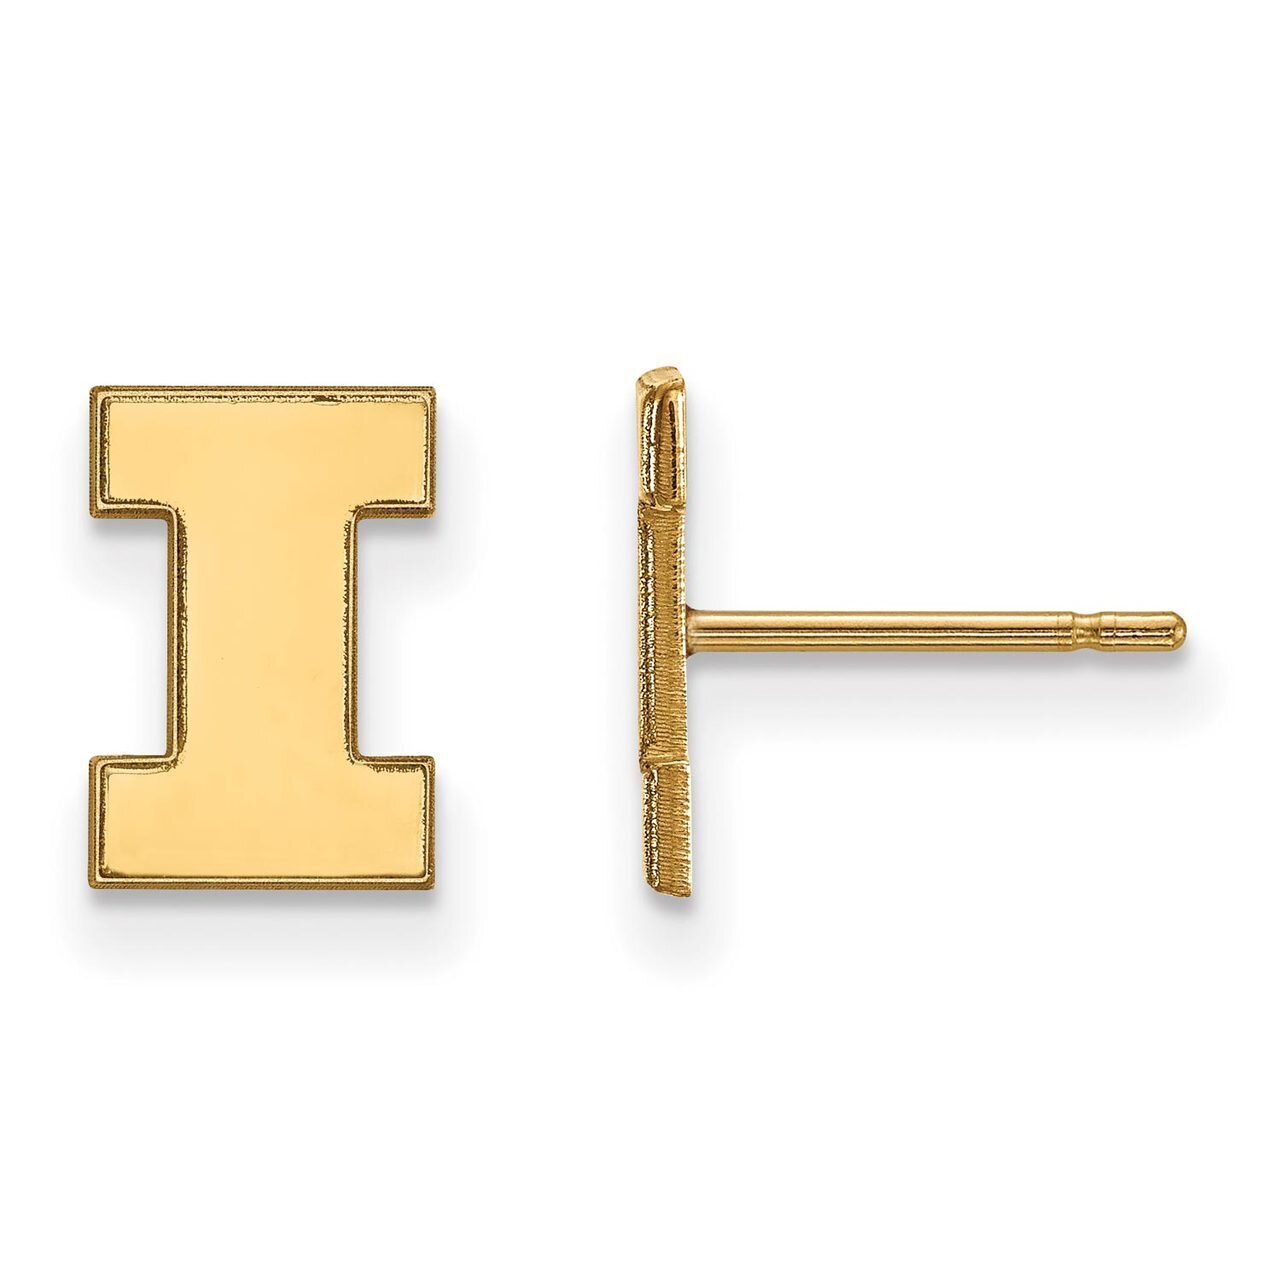 University of Illinois x-Small Post Earring Gold-plated Silver GP008UIL